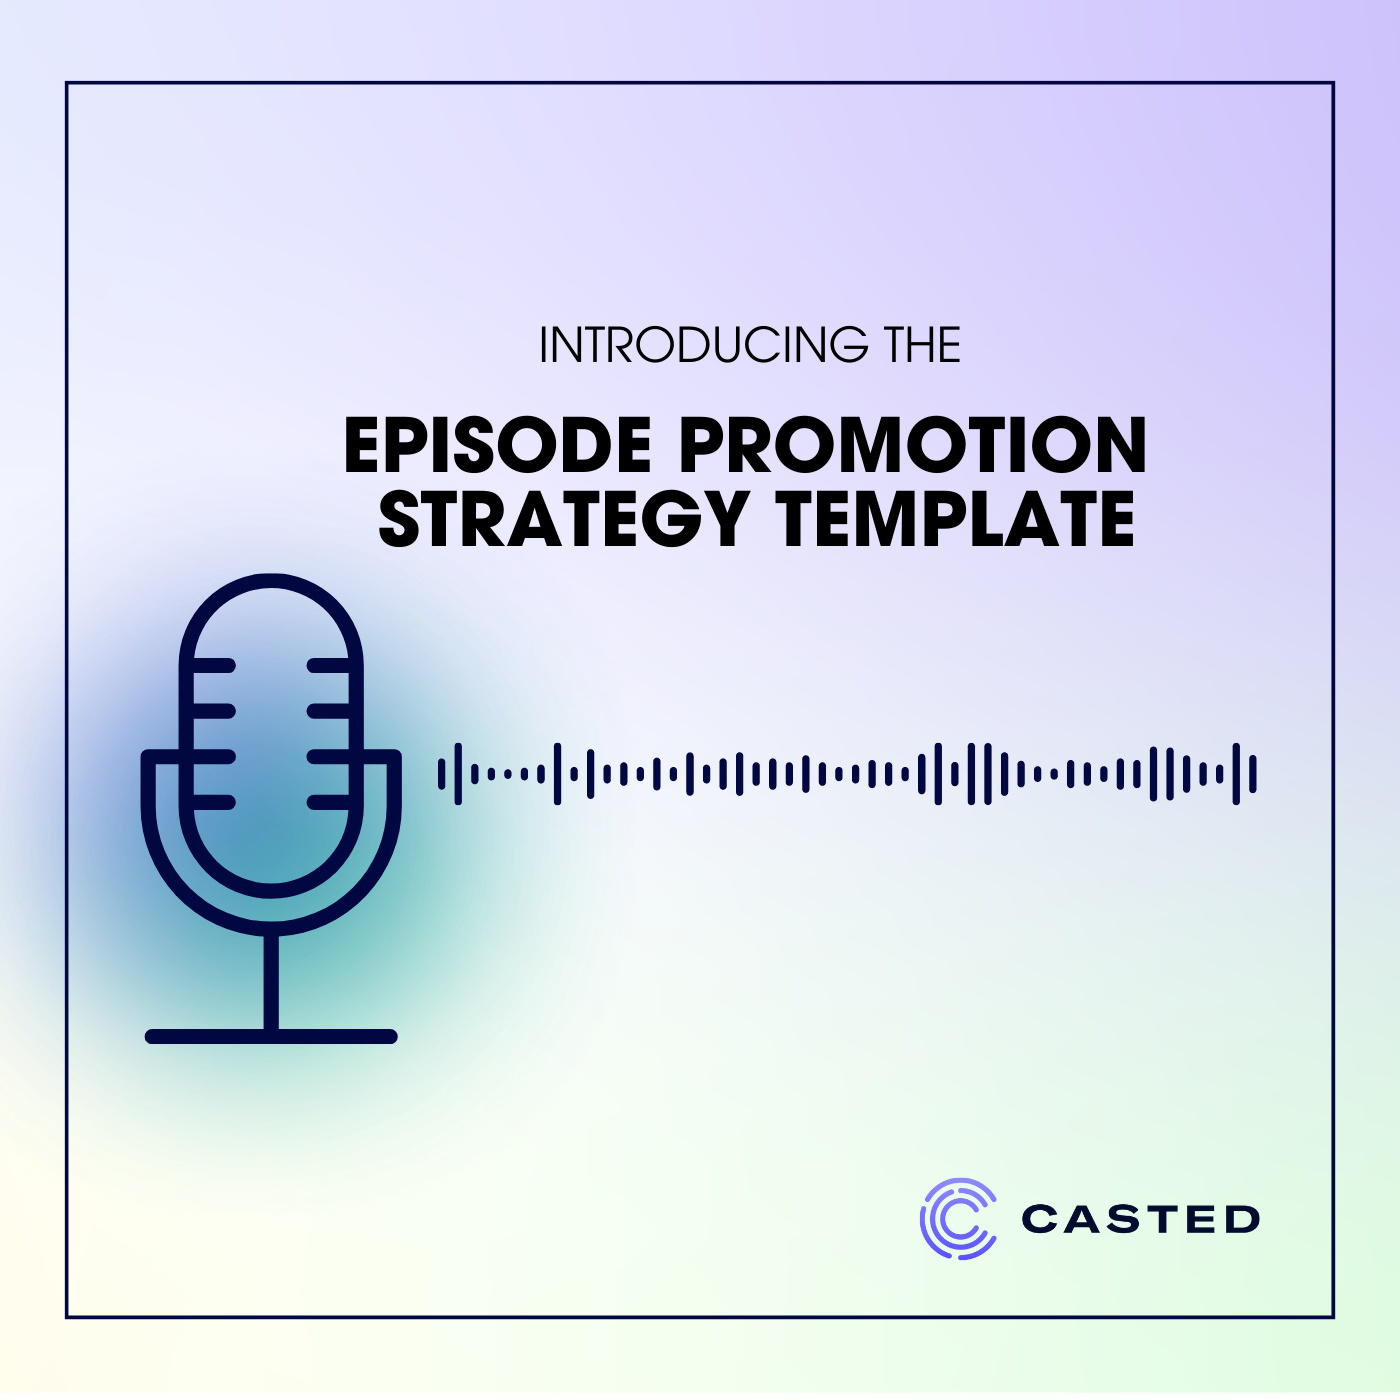 Introducing the Episode Promotion Strategy Template